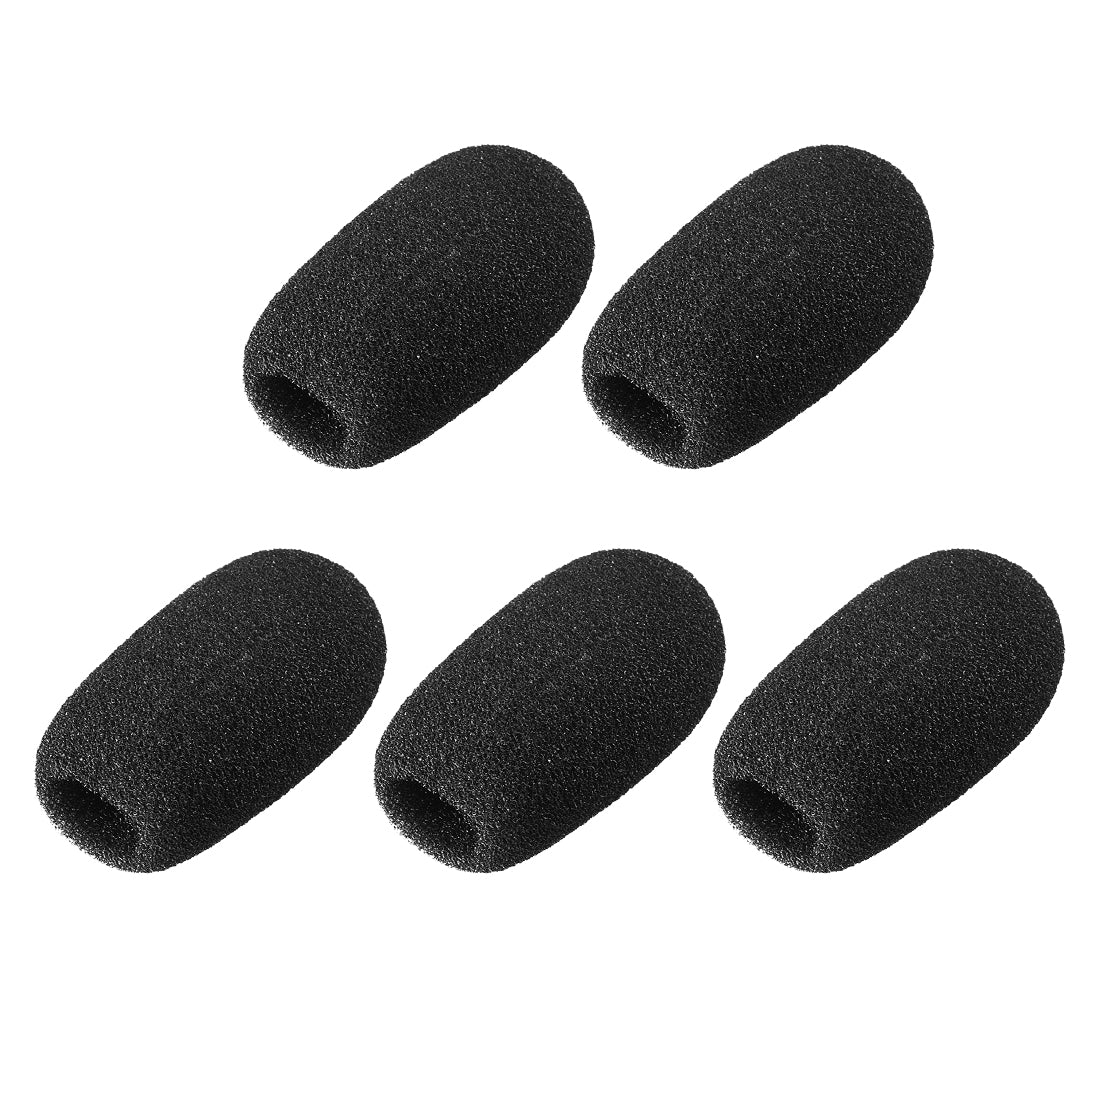 uxcell Uxcell 10PCS Sponge Foam Mic Cover Conference Microphone Windscreen Shield Protection Black 60mm Long